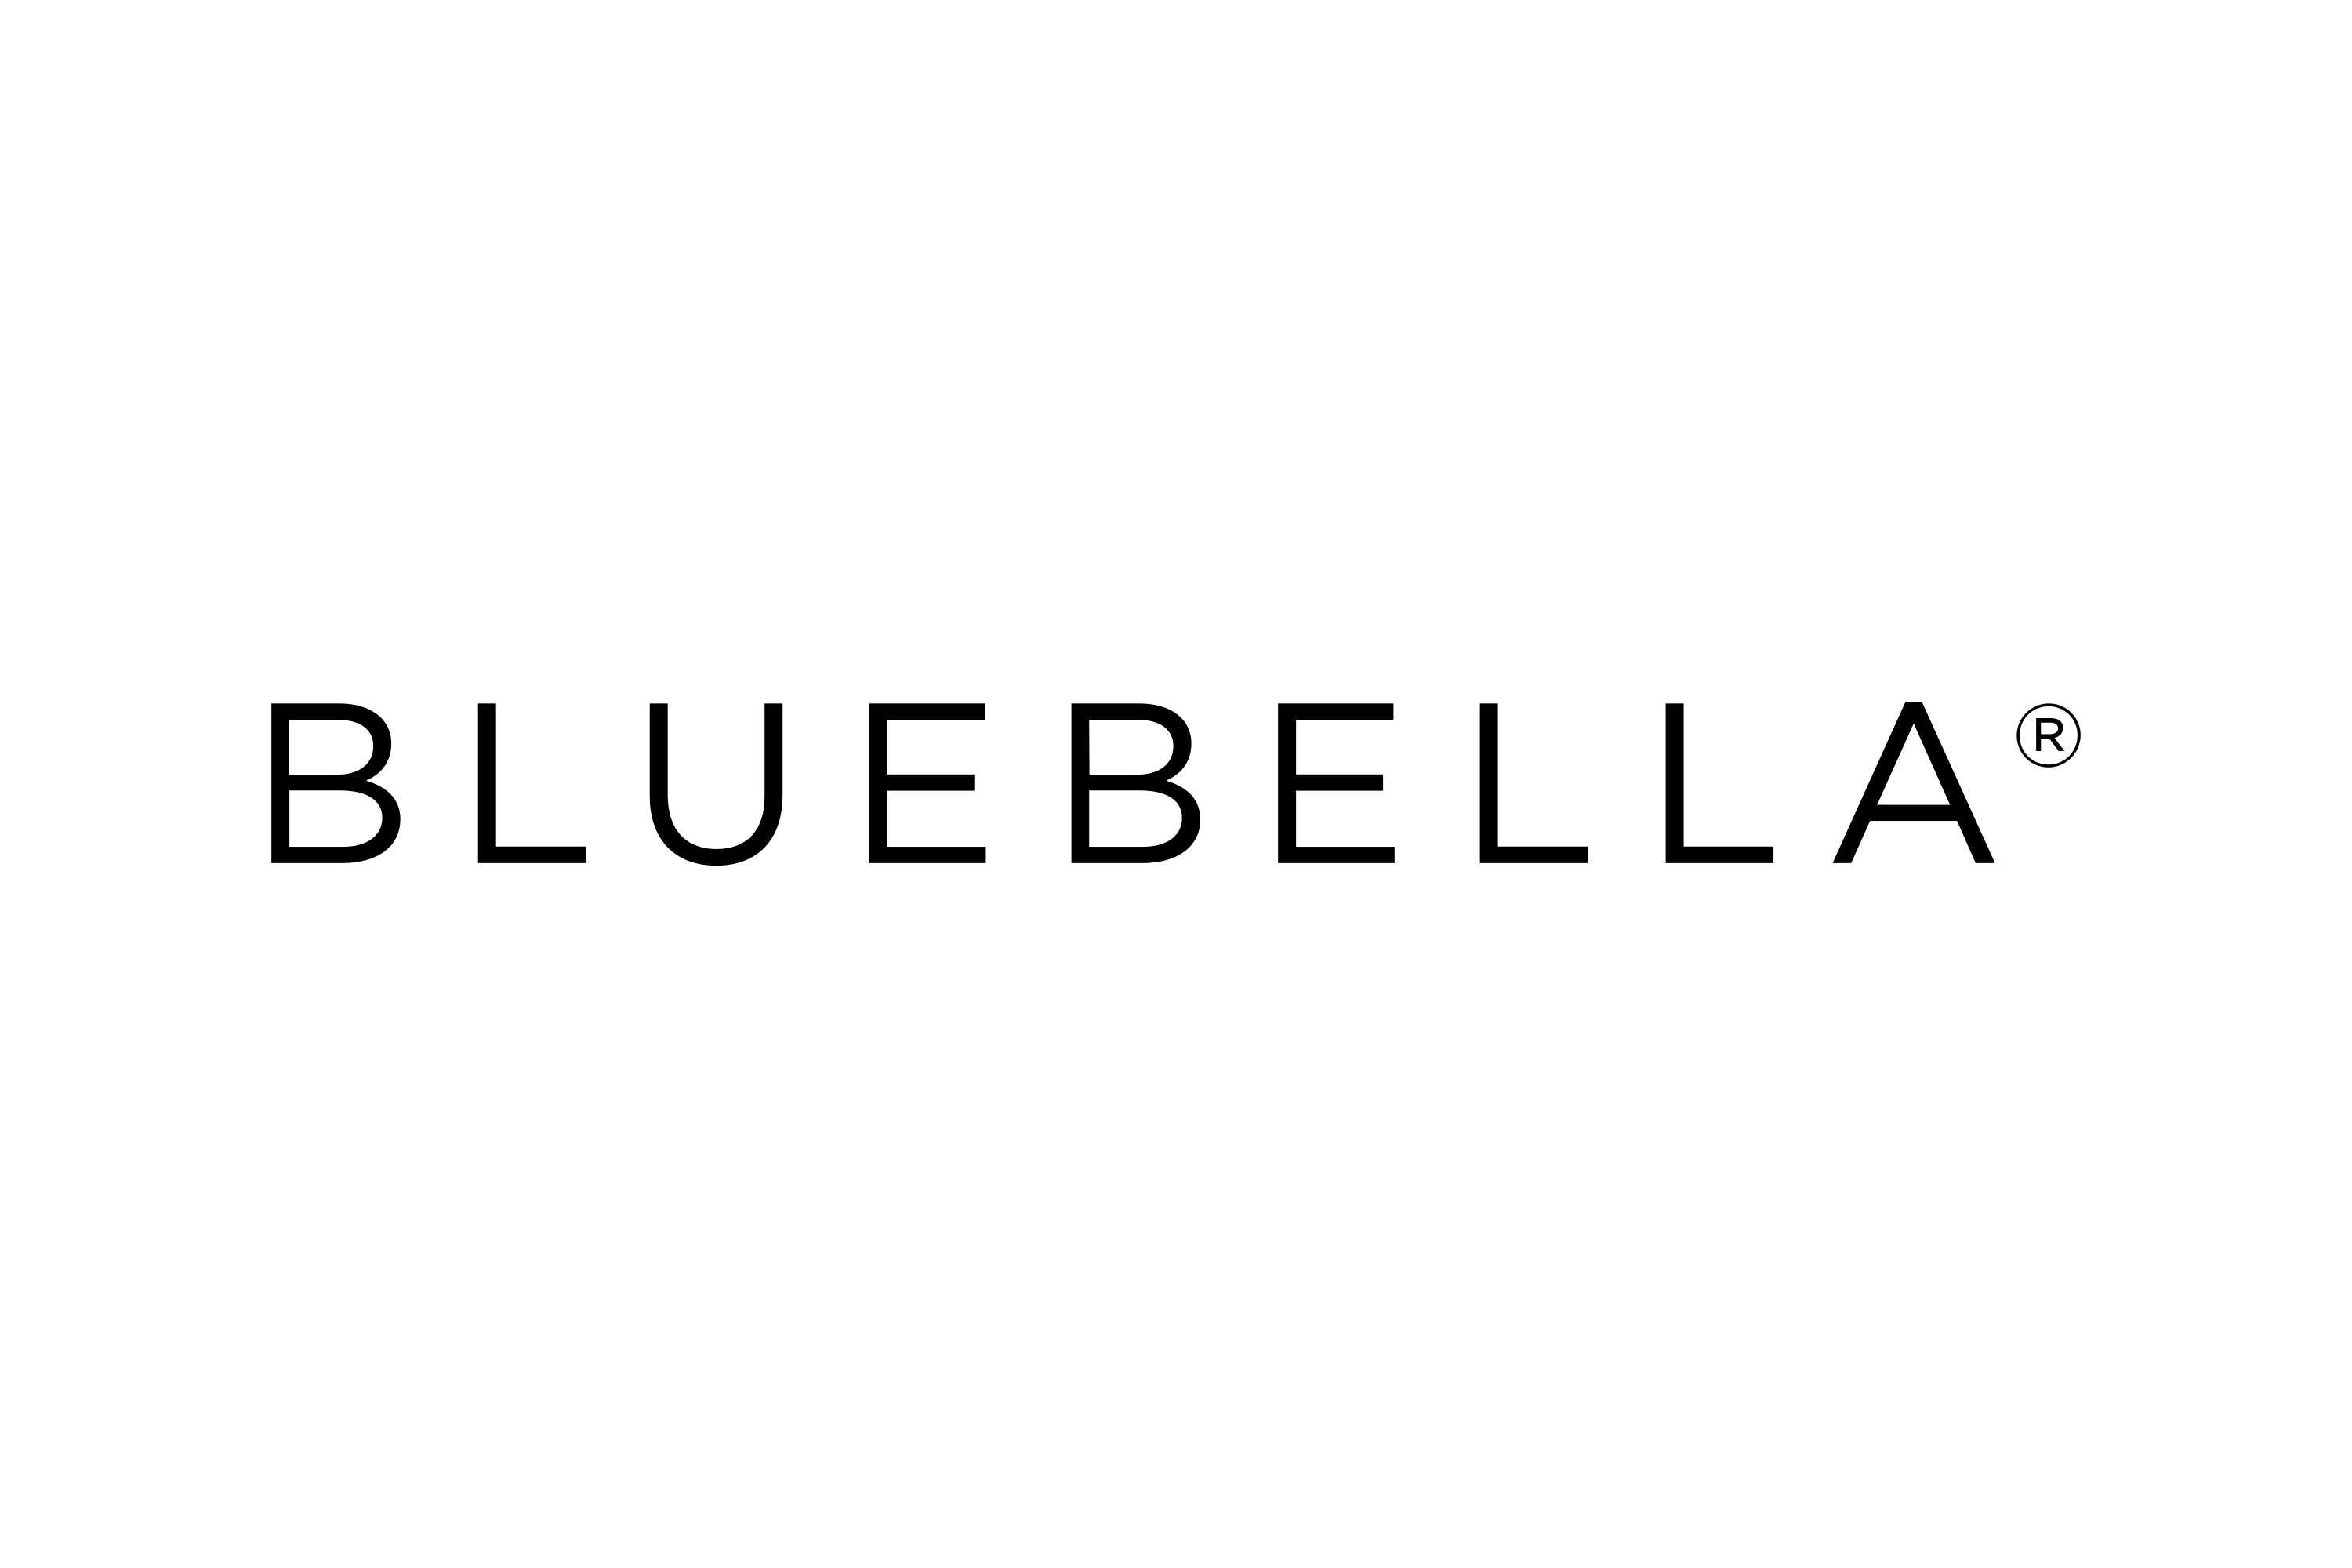 Bluebella Coupons & Promo Codes